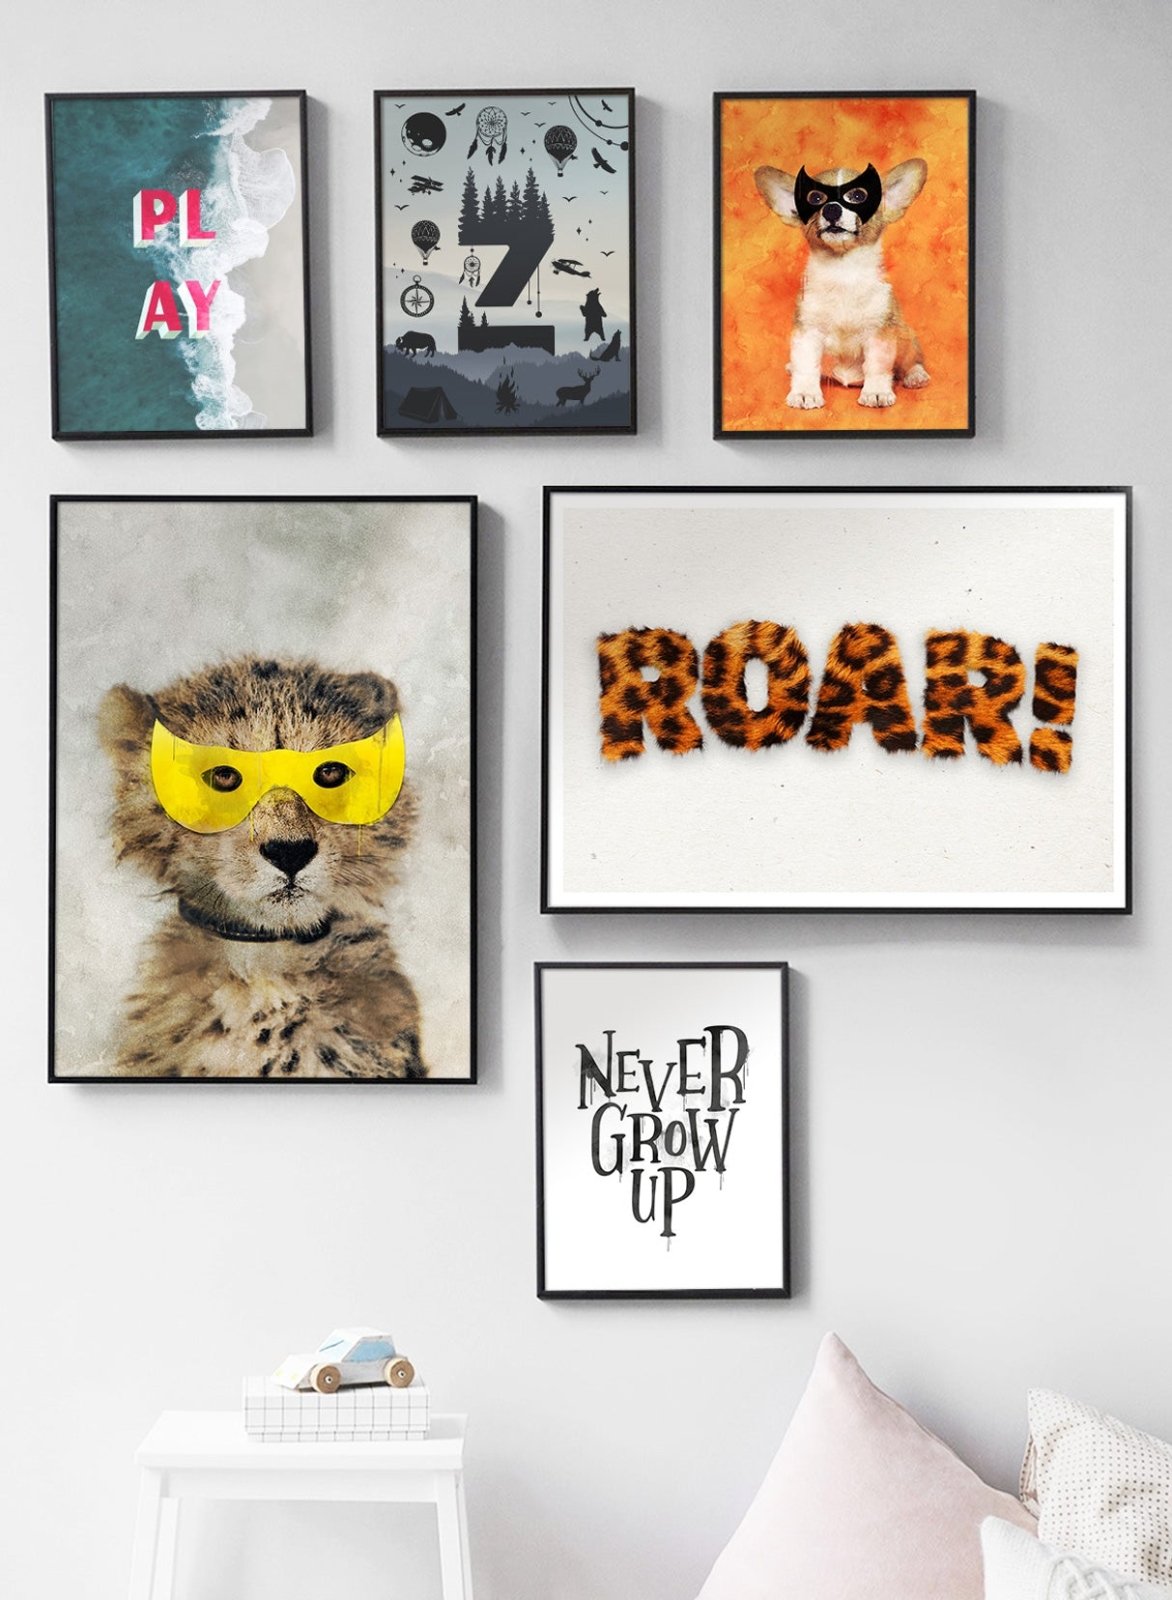 4 steps to create the perfect gallery wall